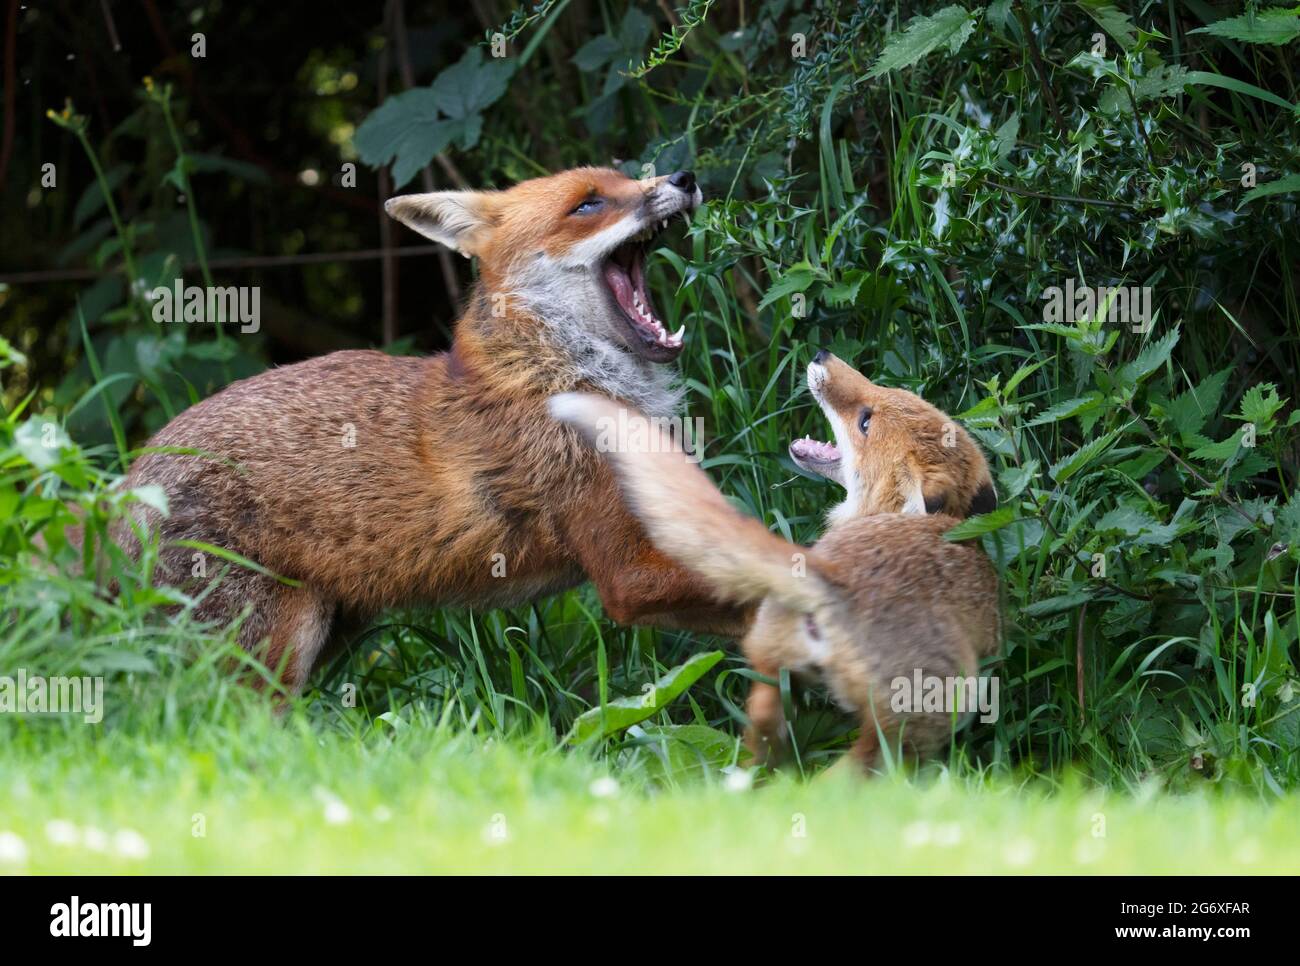 A Red Fox (Vulpes vulpes) cub engages in some restrained play fighting with an adult fox Stock Photo